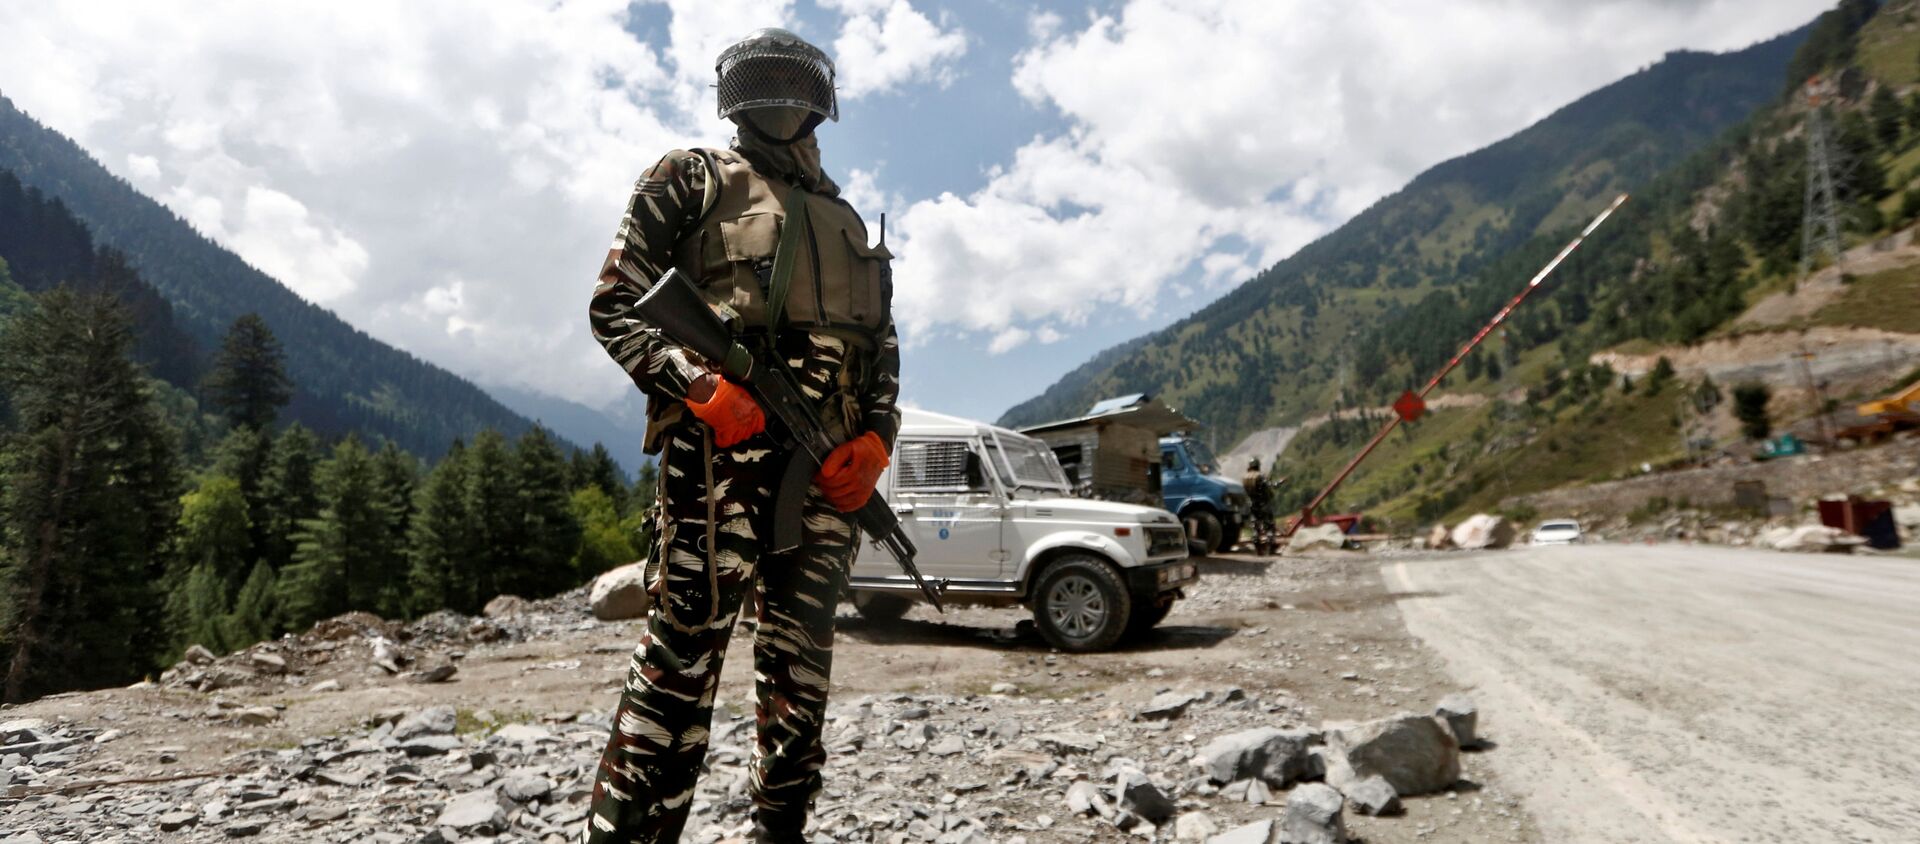 An Indian Central Reserve Police Force (CRPF) personnel stands guard at a checkpoint along a highway leading to Ladakh, at Gagangeer in Kashmir's Ganderbal district September 2, 2020 - Sputnik International, 1920, 07.09.2020